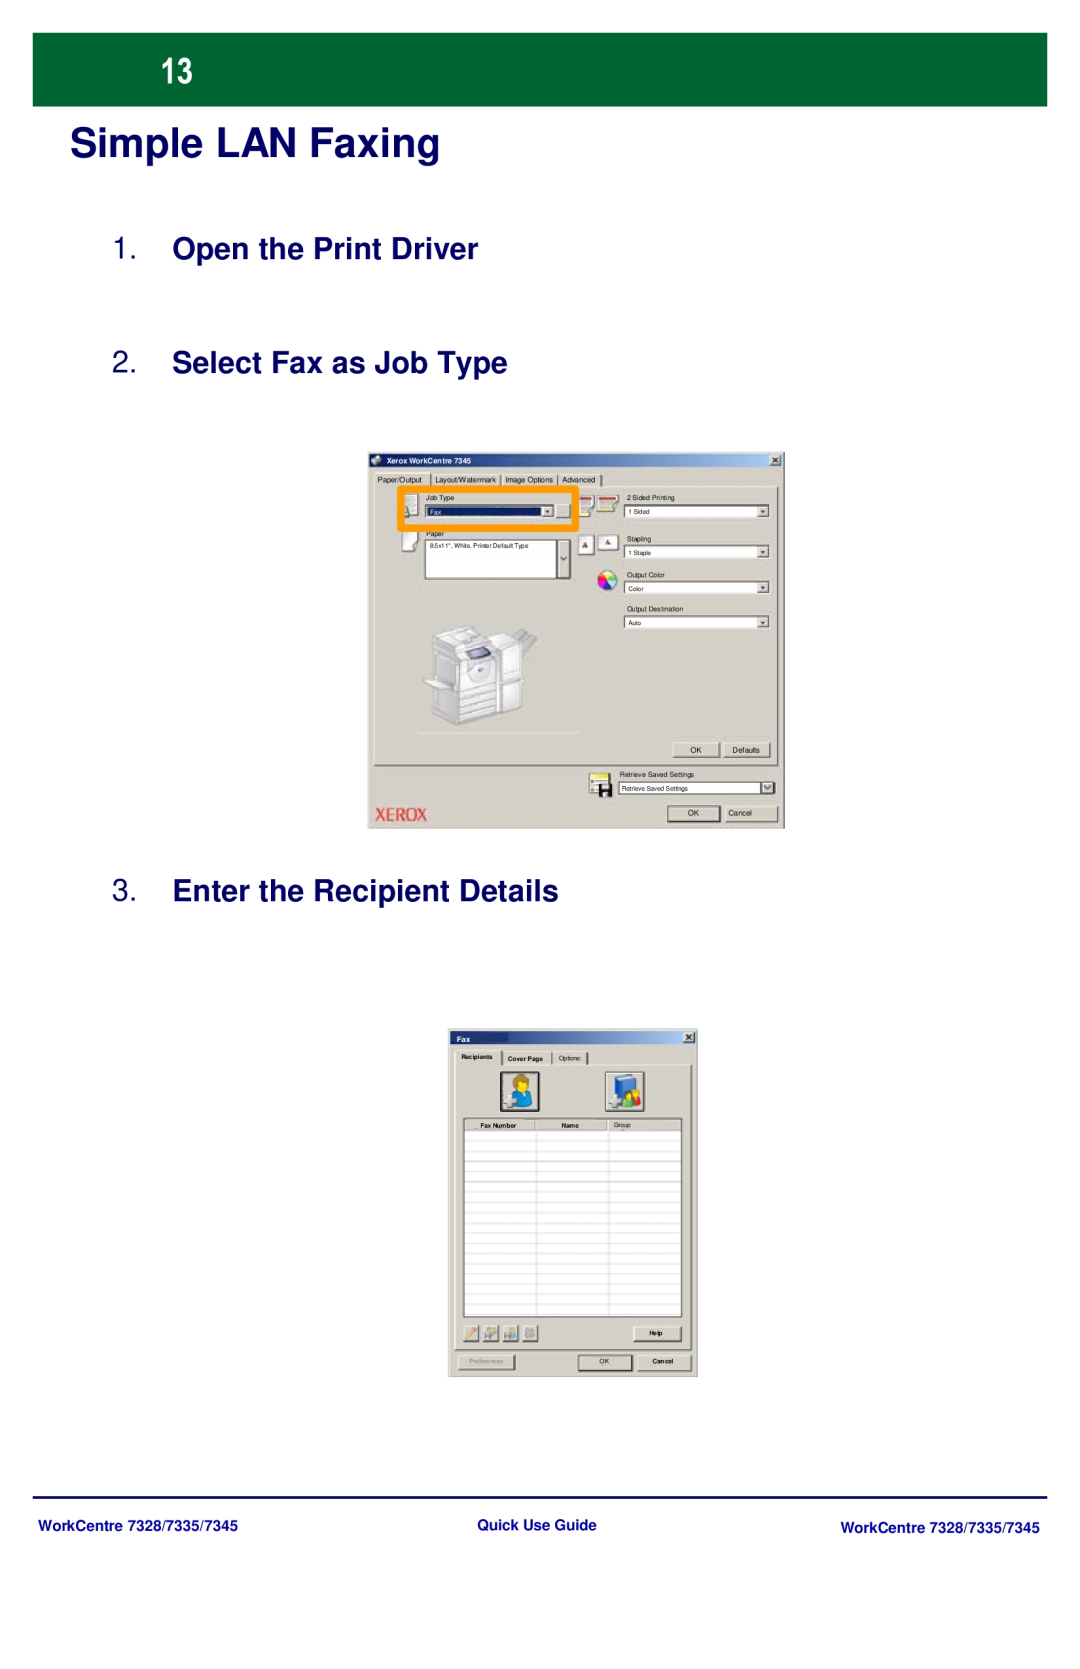 Xerox 7345 Simple LAN Faxing, Open the Print Driver 2.Select Fax as Job Type, Enter the Recipient Details, Quick Use Guide 